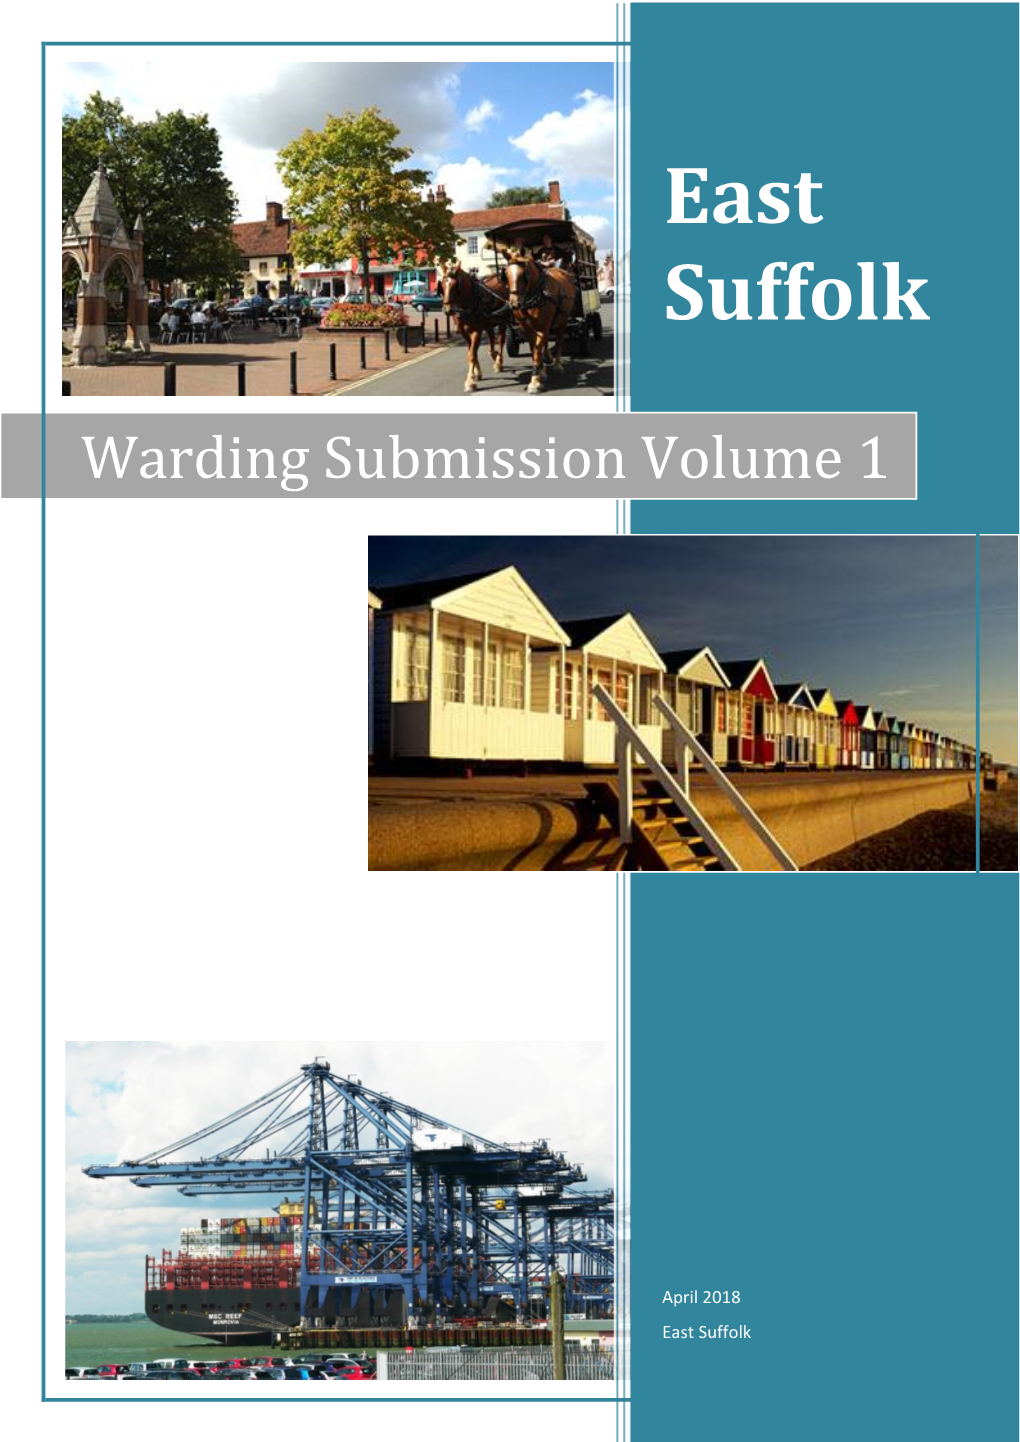 Warding Submission Volume 1